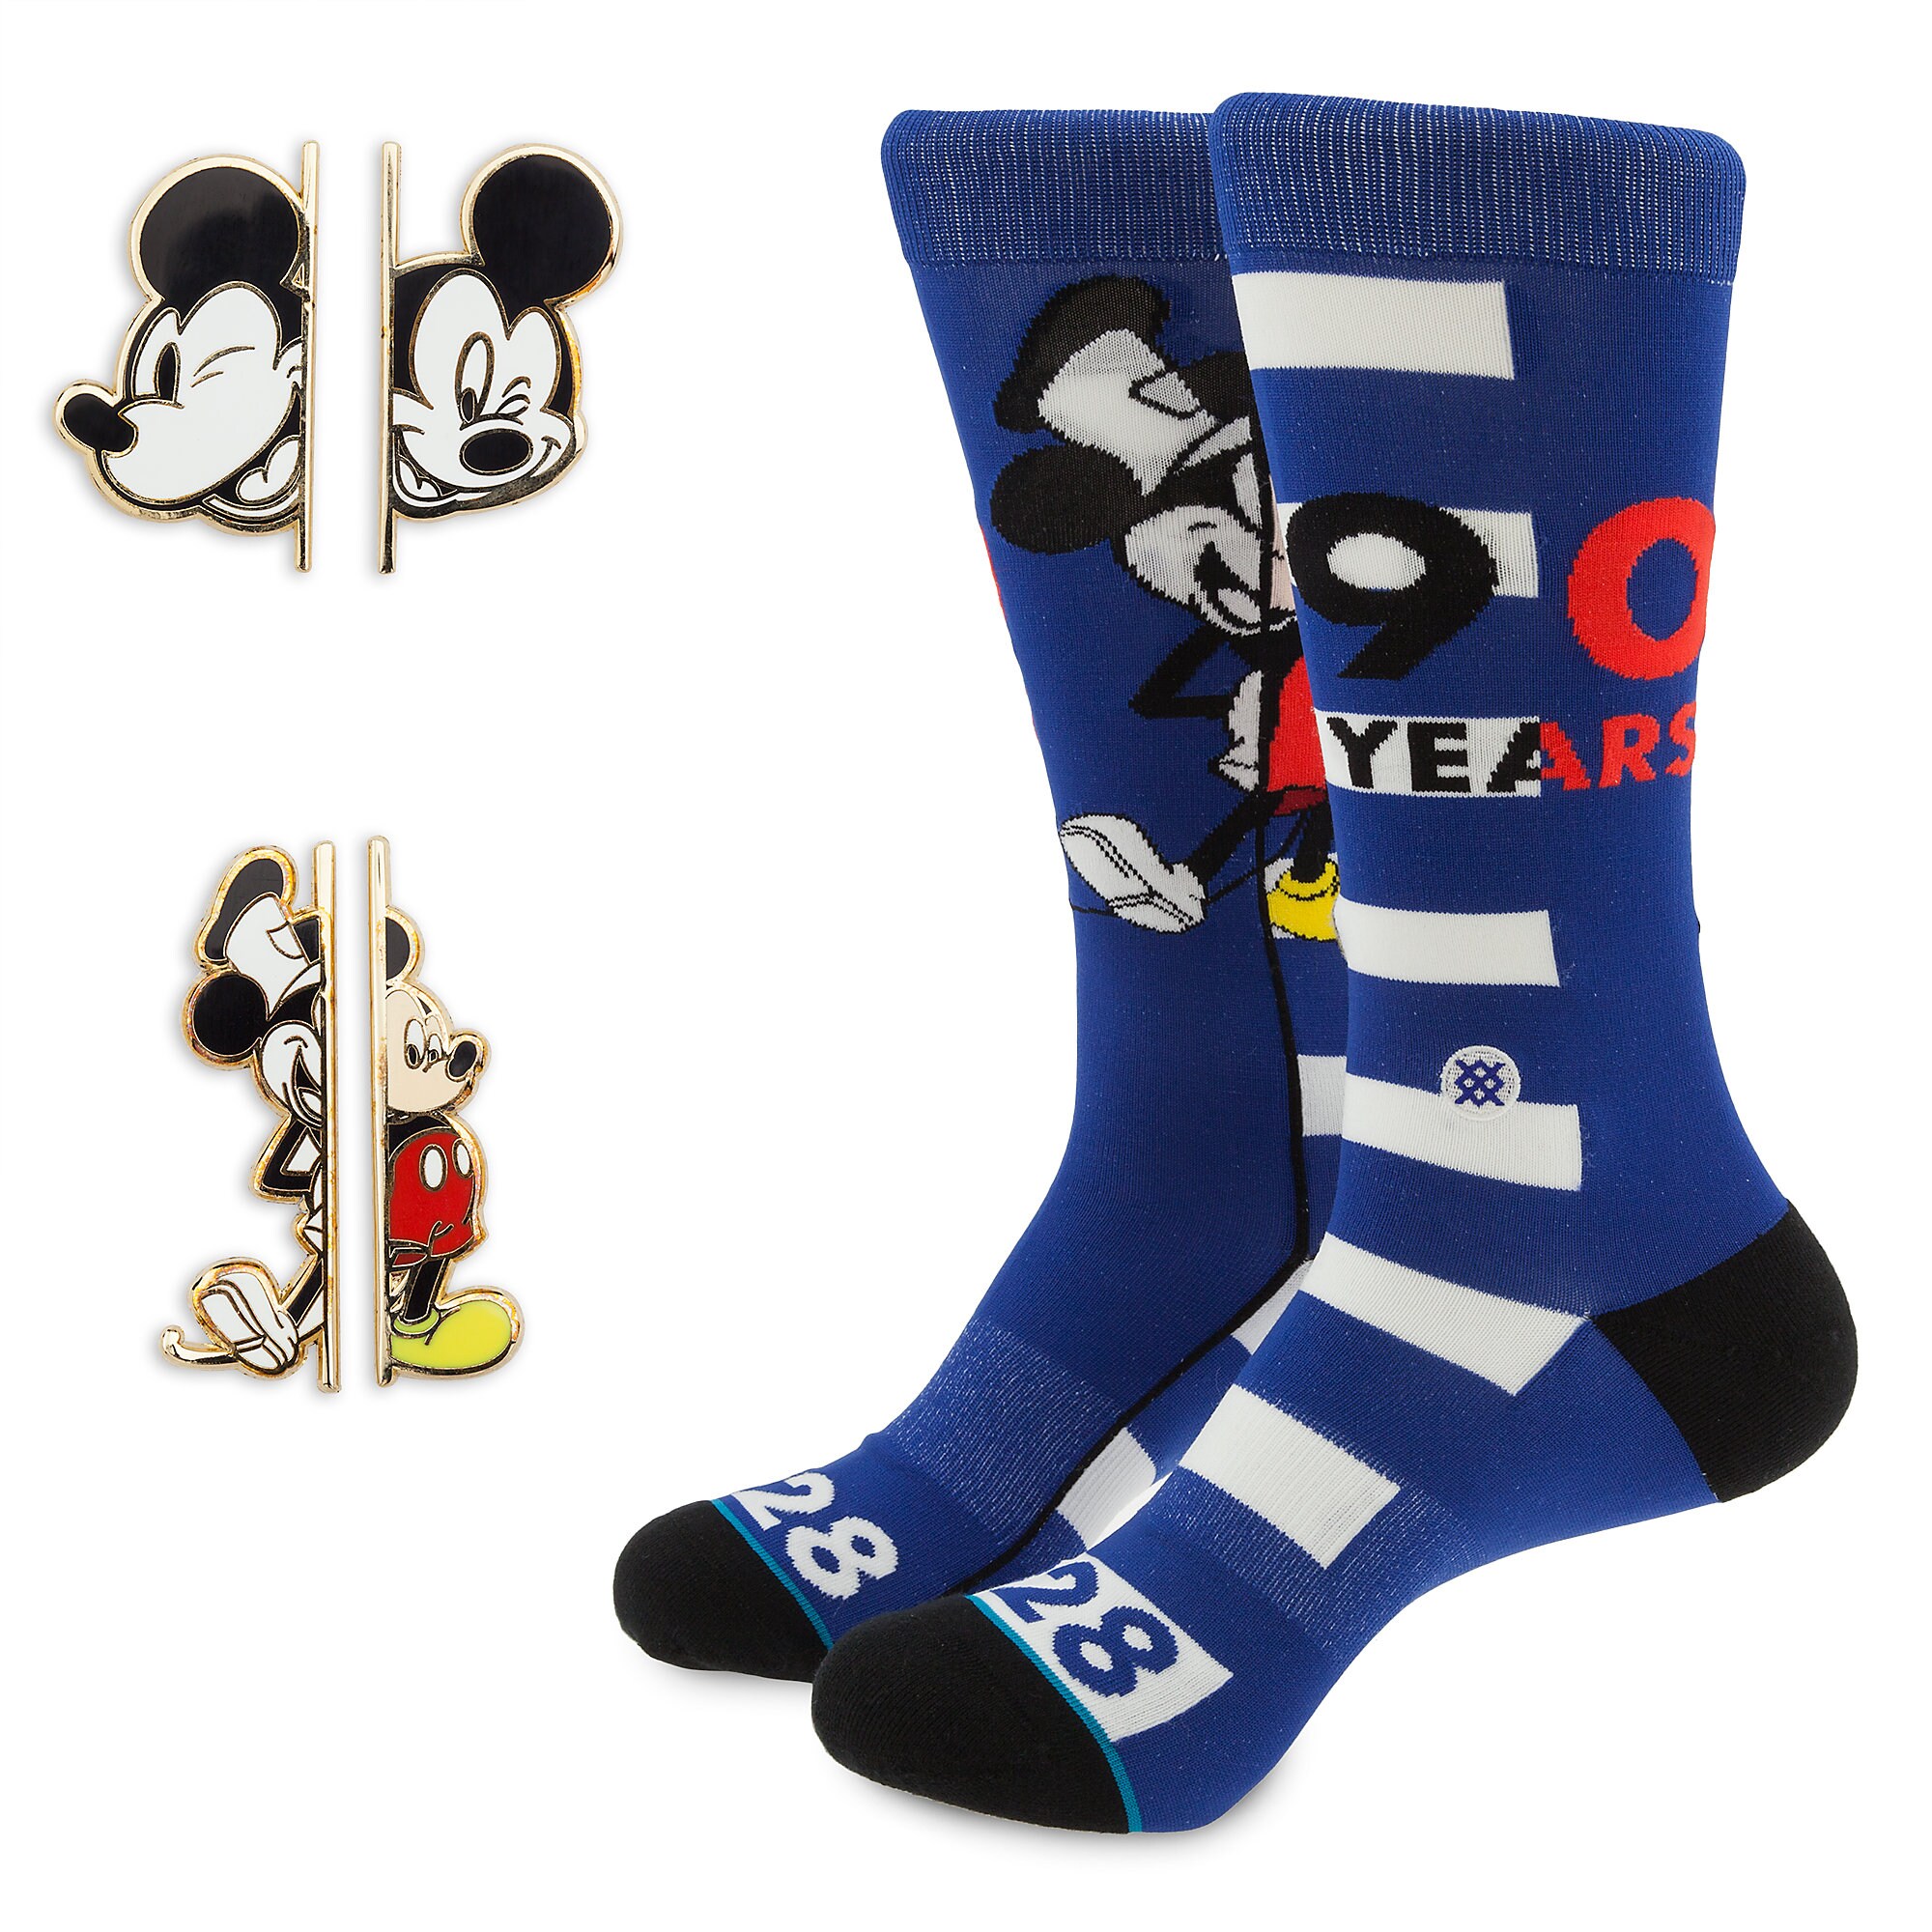 Mickey Mouse 90th Anniversary Socks and Pins Box Set by Stance